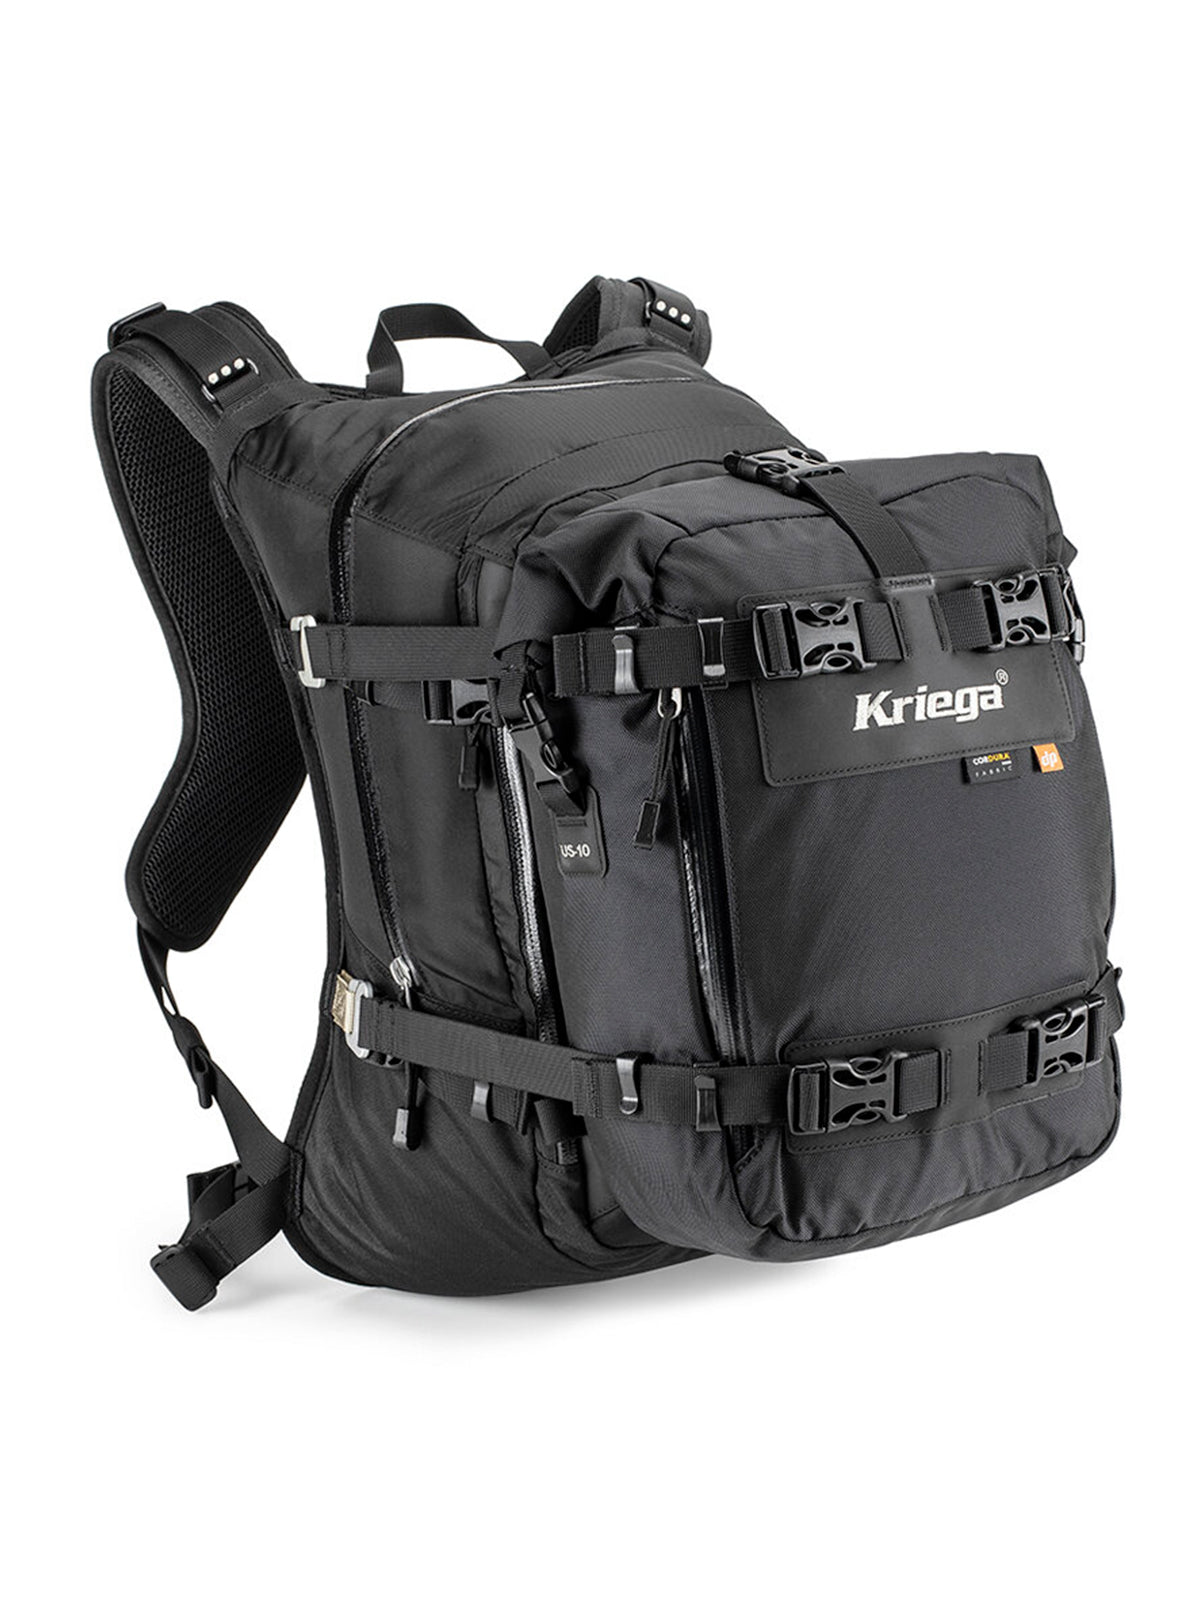 Kriega R20 Backpack with US10 attached